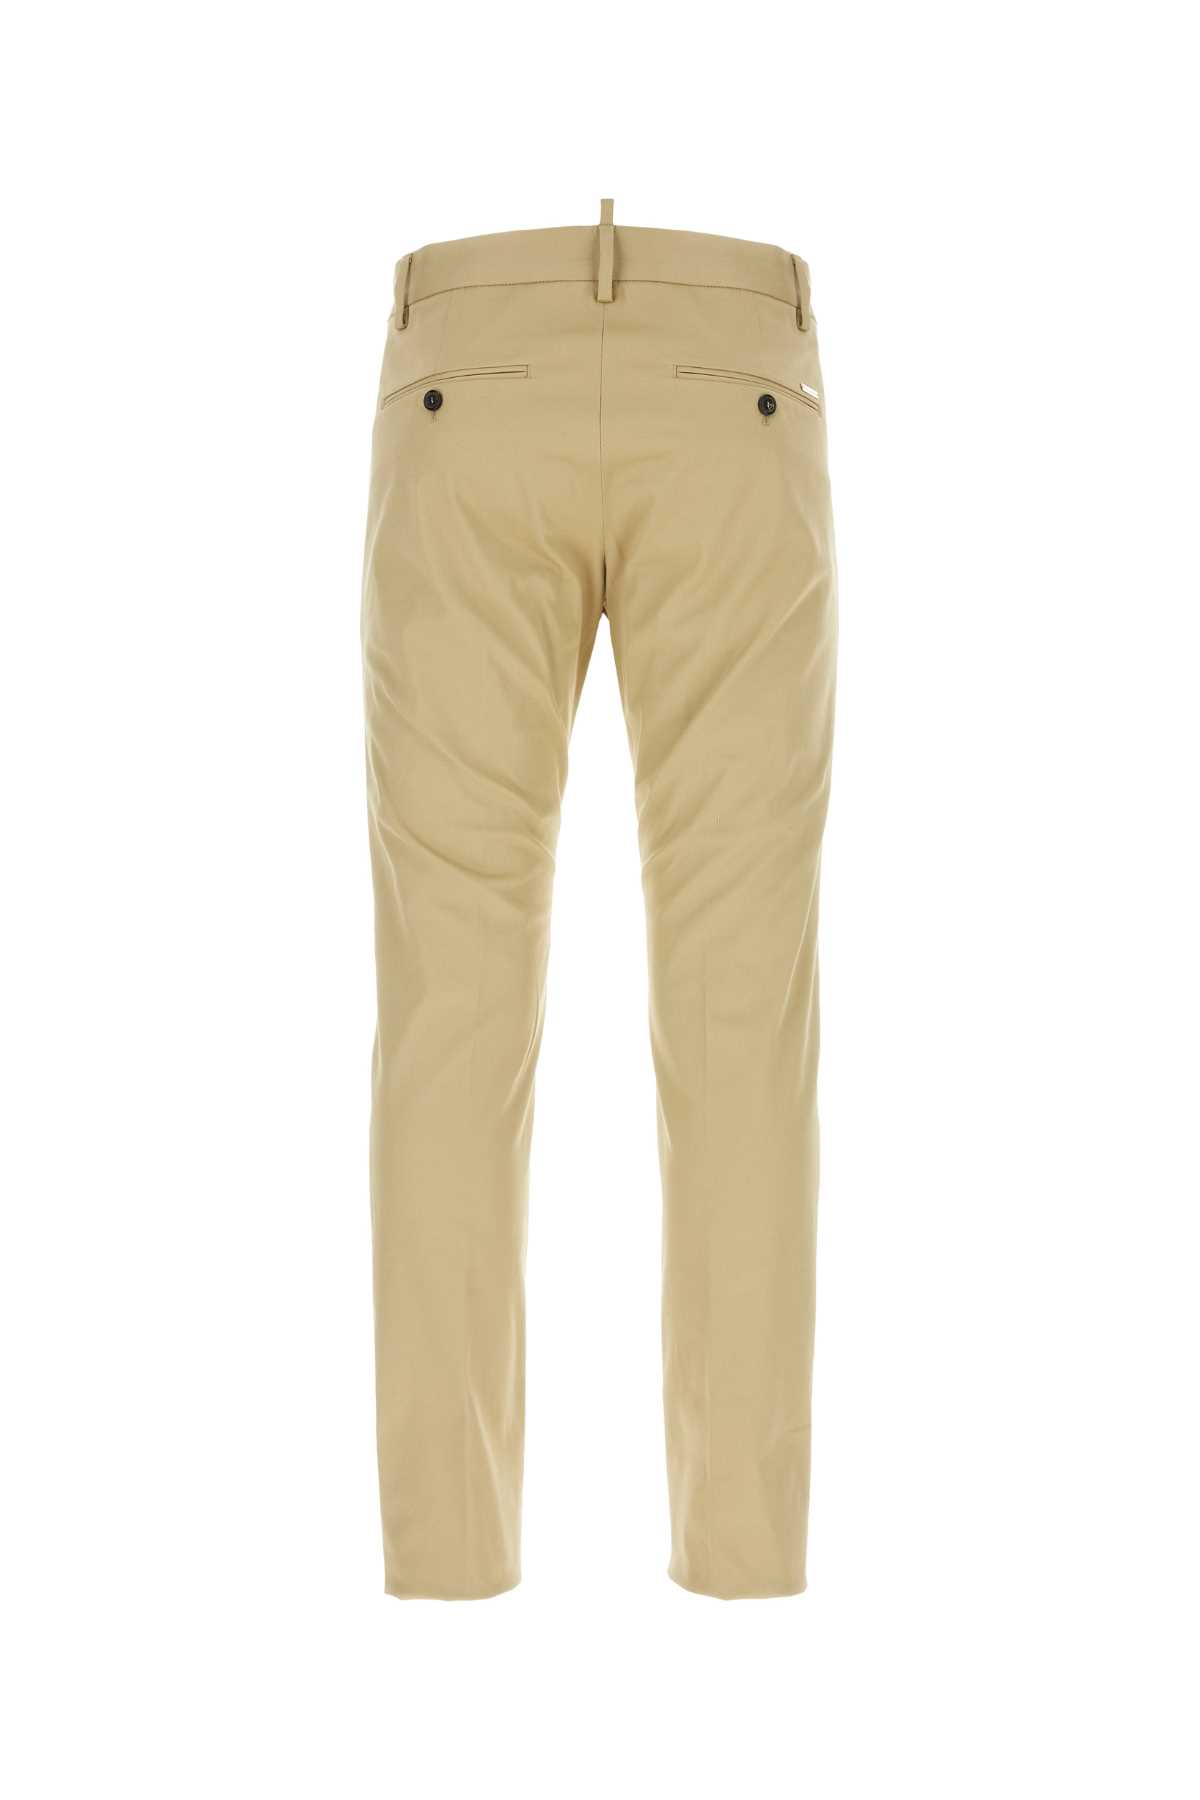 Dsquared2 Beige Stretch Cotton Cool Guy Pant In Stone